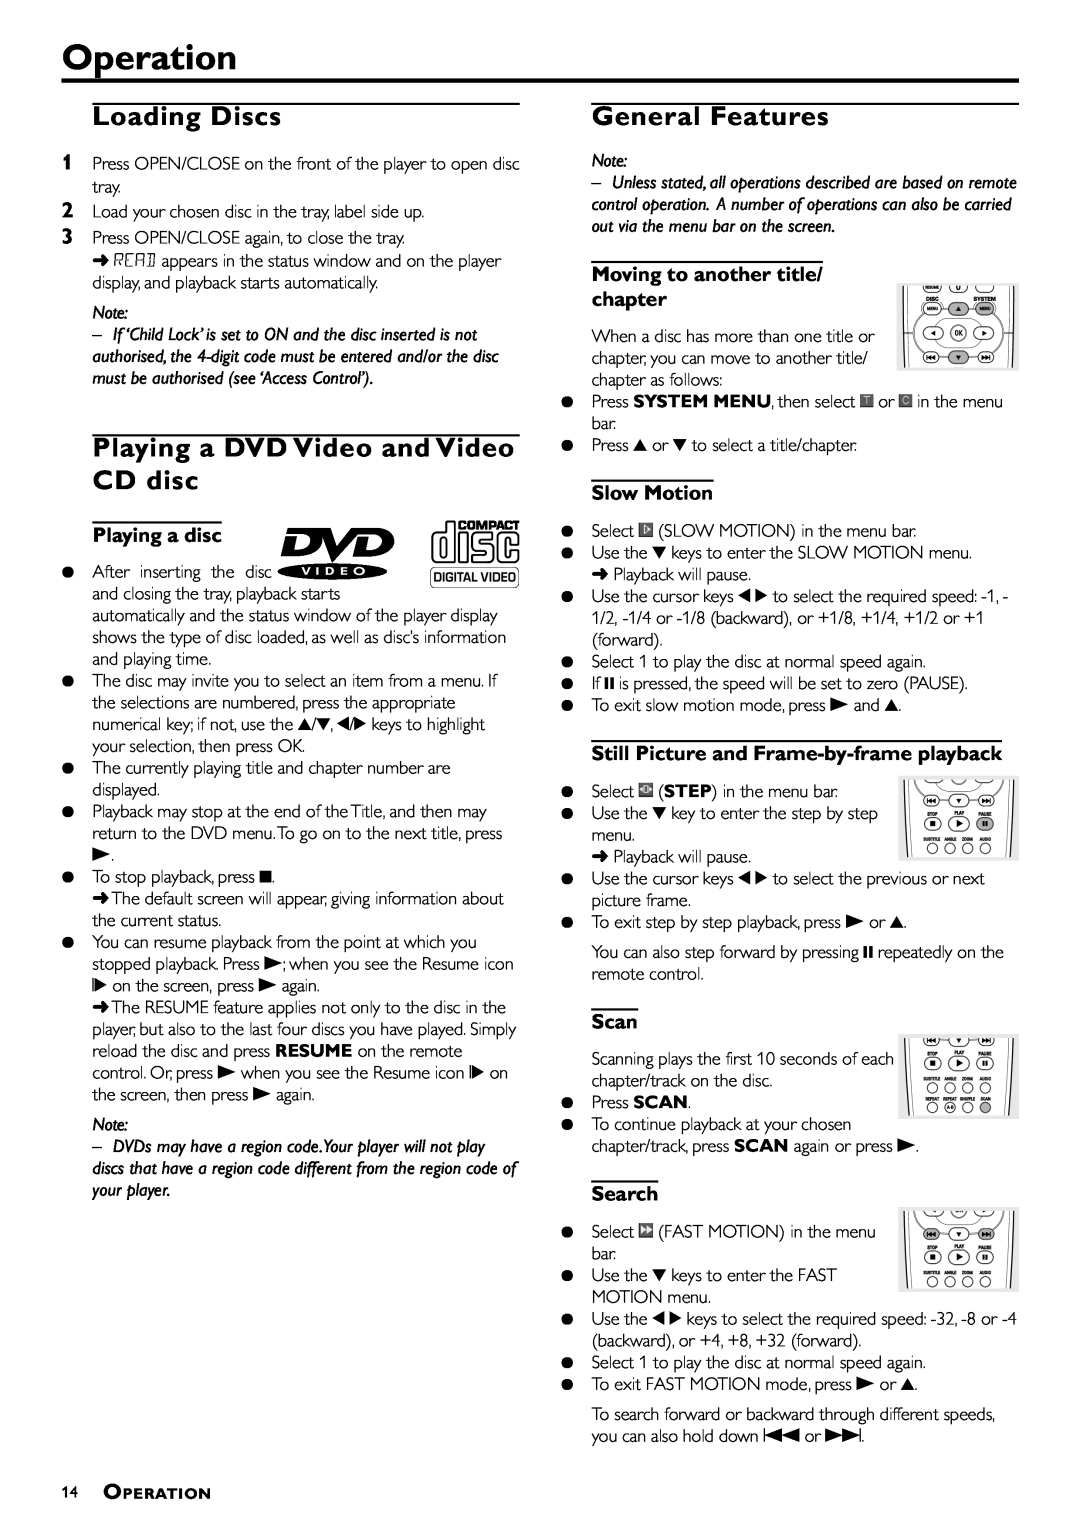 Philips DVD-762/051 Operation, Loading Discs, Playing a DVD Video and Video CD disc, General Features, Playing a disc 